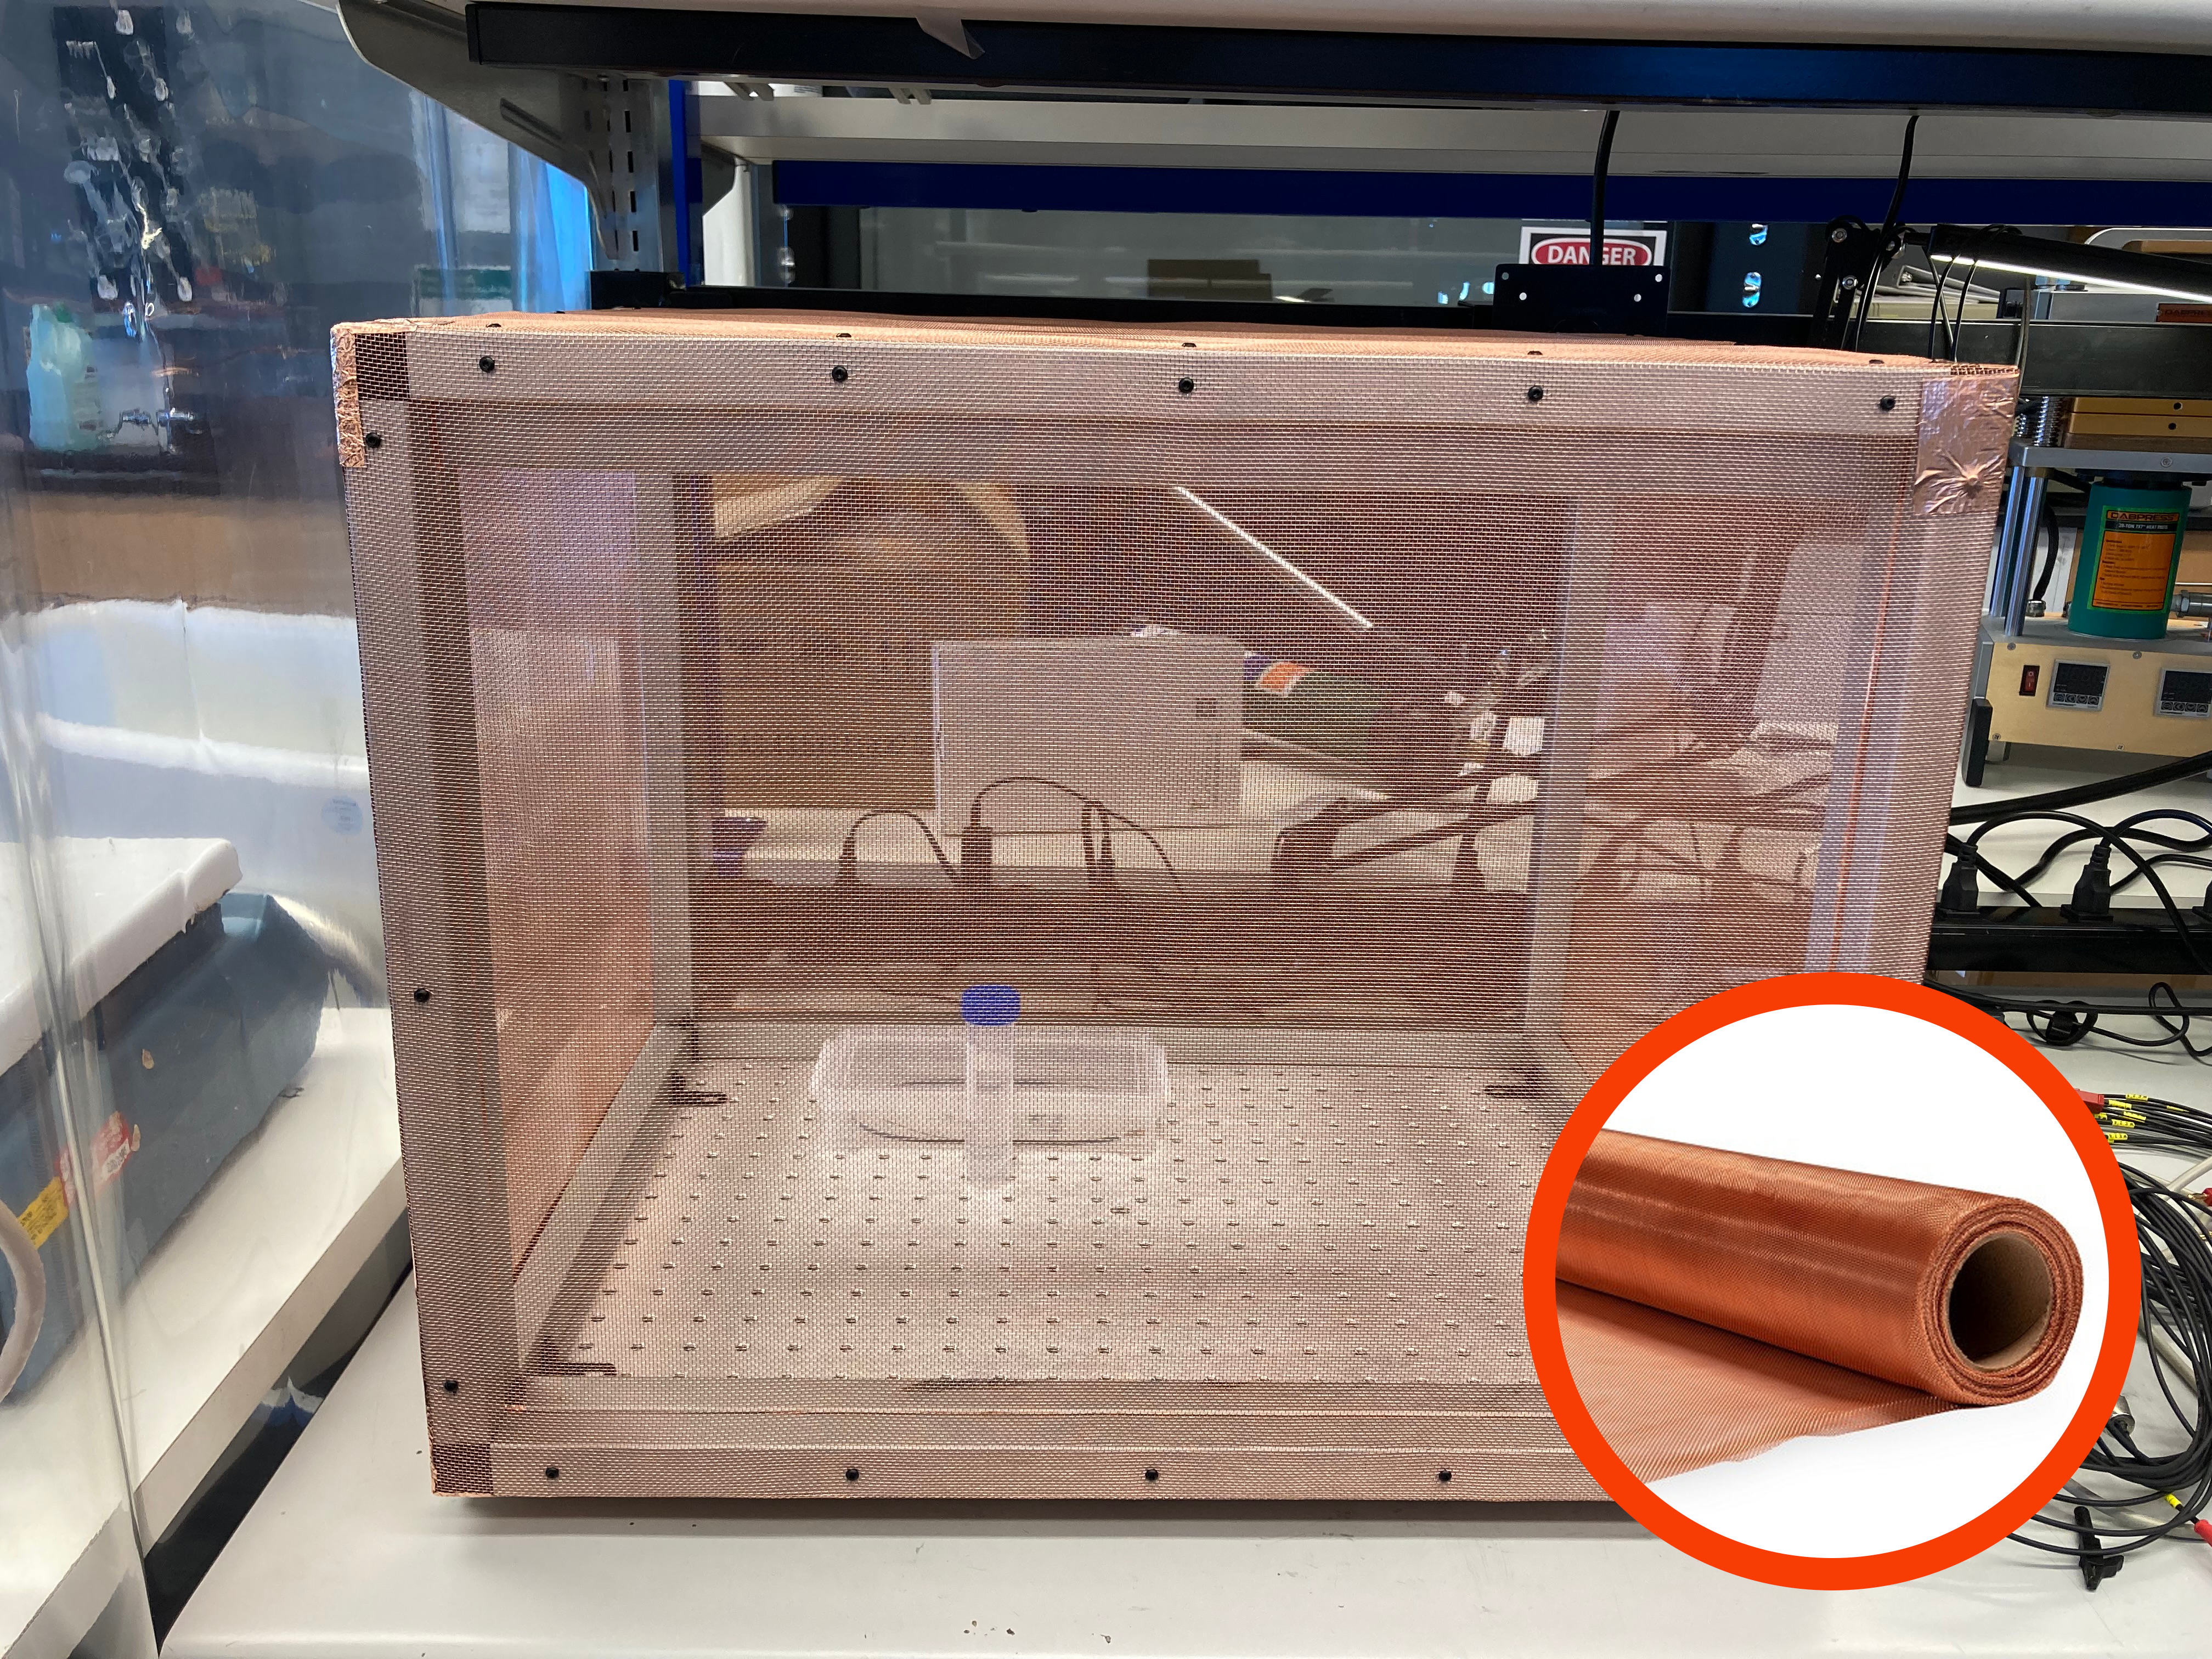 A faraday cage for EMI shielding built with Pure Copper Screen Mesh